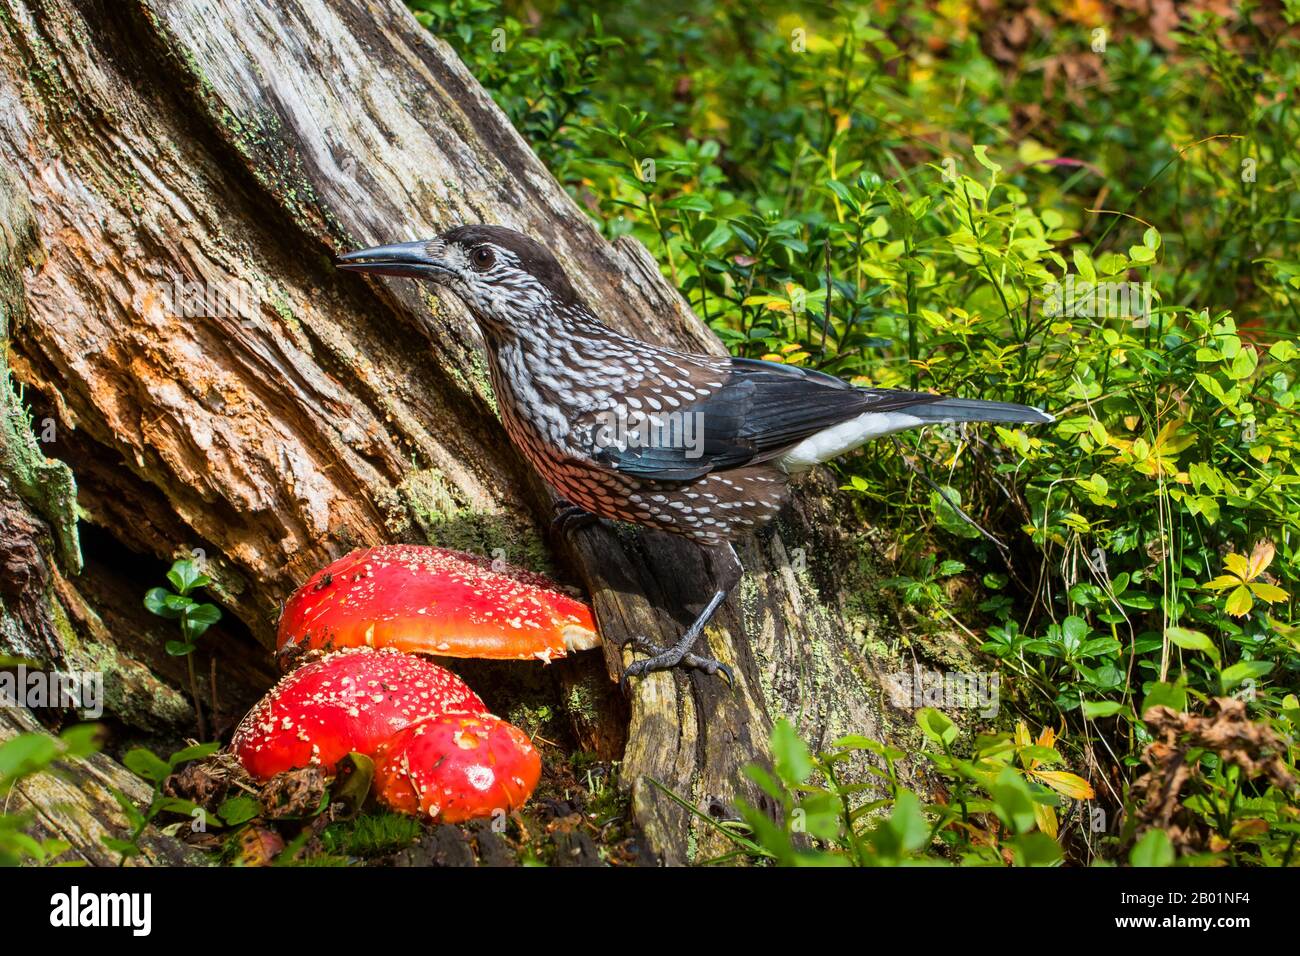 spotted nutcracker (Nucifraga caryocatactes), foraging at a tree snag with fly agarics, Switzerland, Grisons Stock Photo